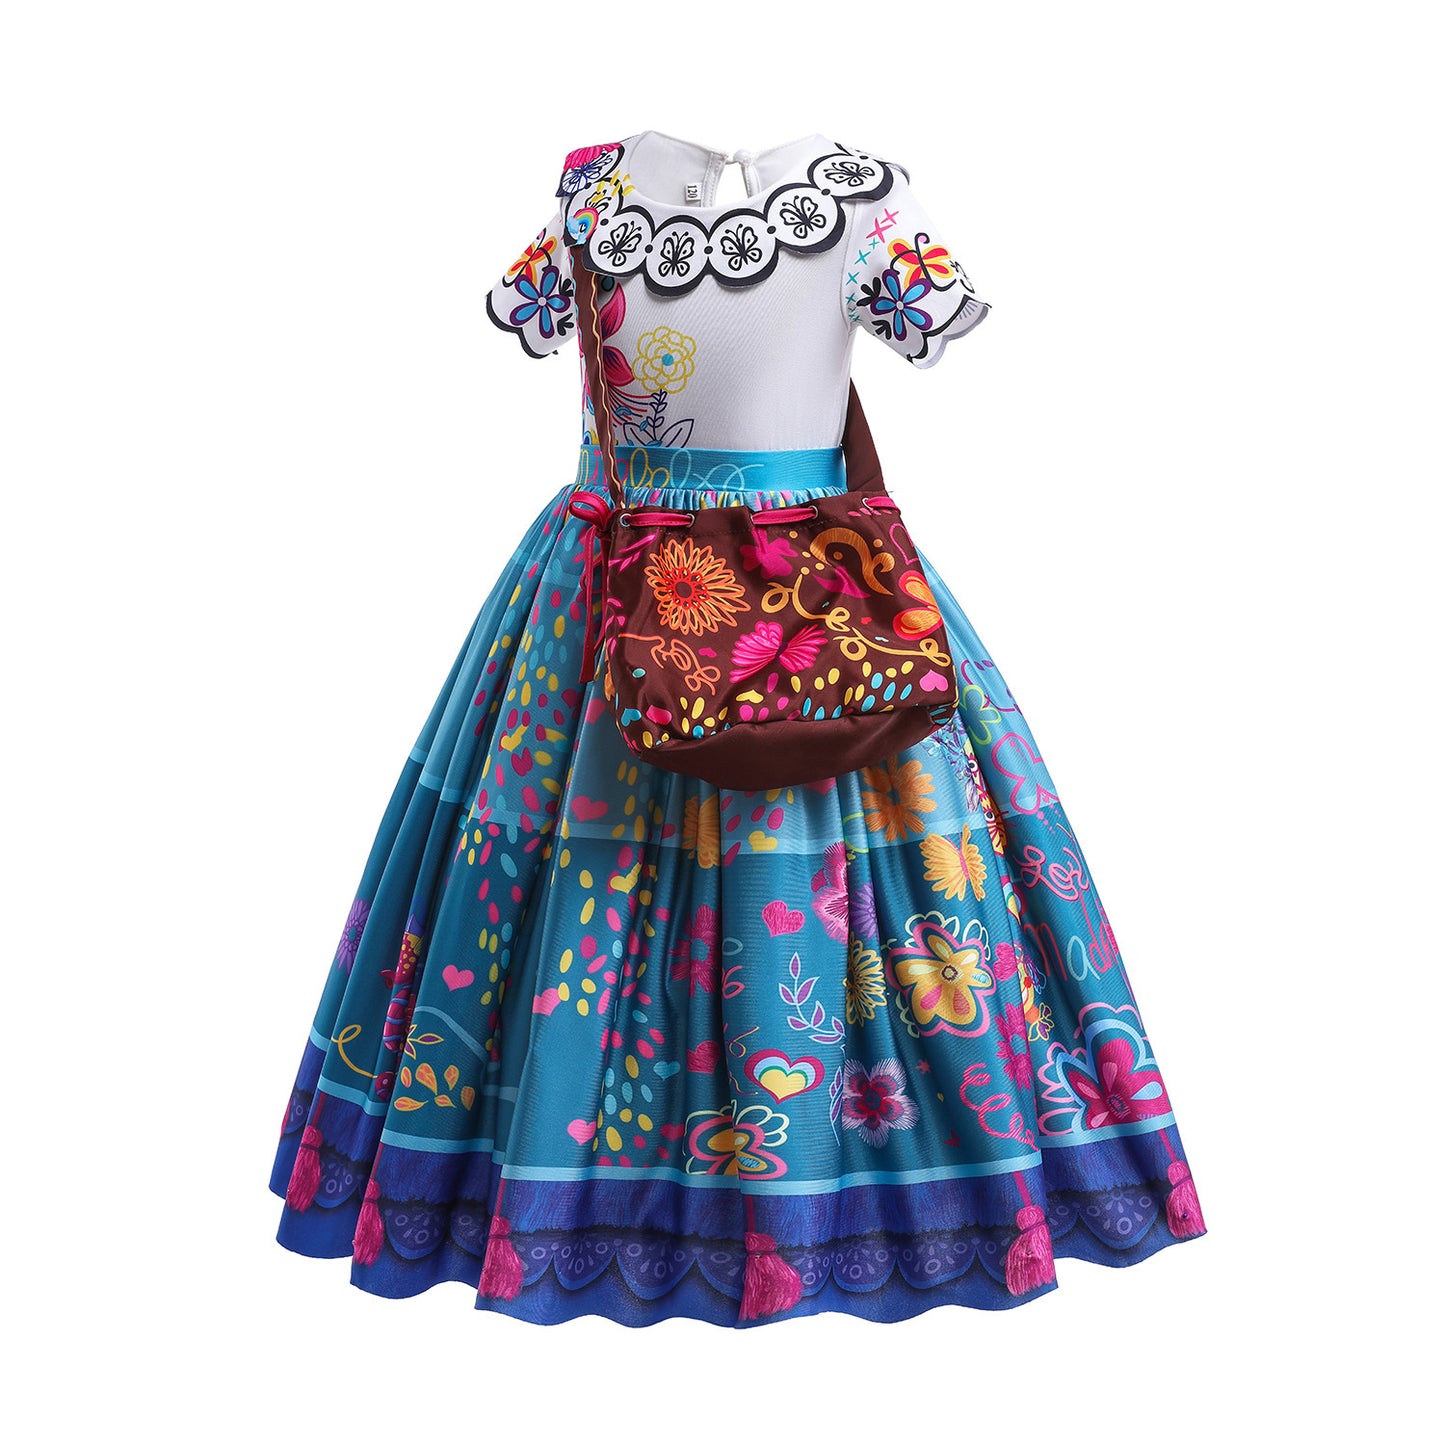 Mirabels colorful gown with handbag.